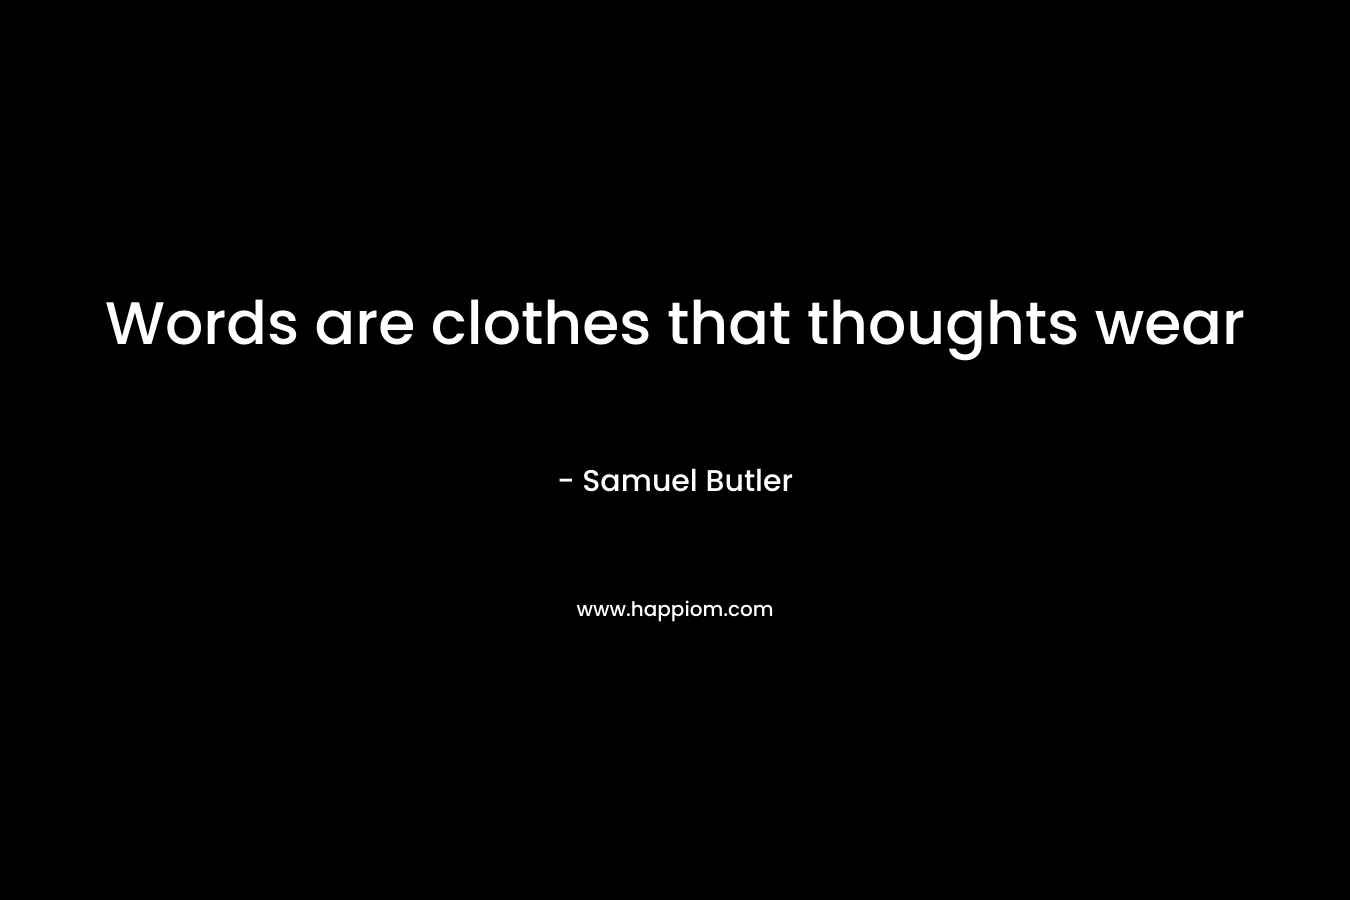 Words are clothes that thoughts wear